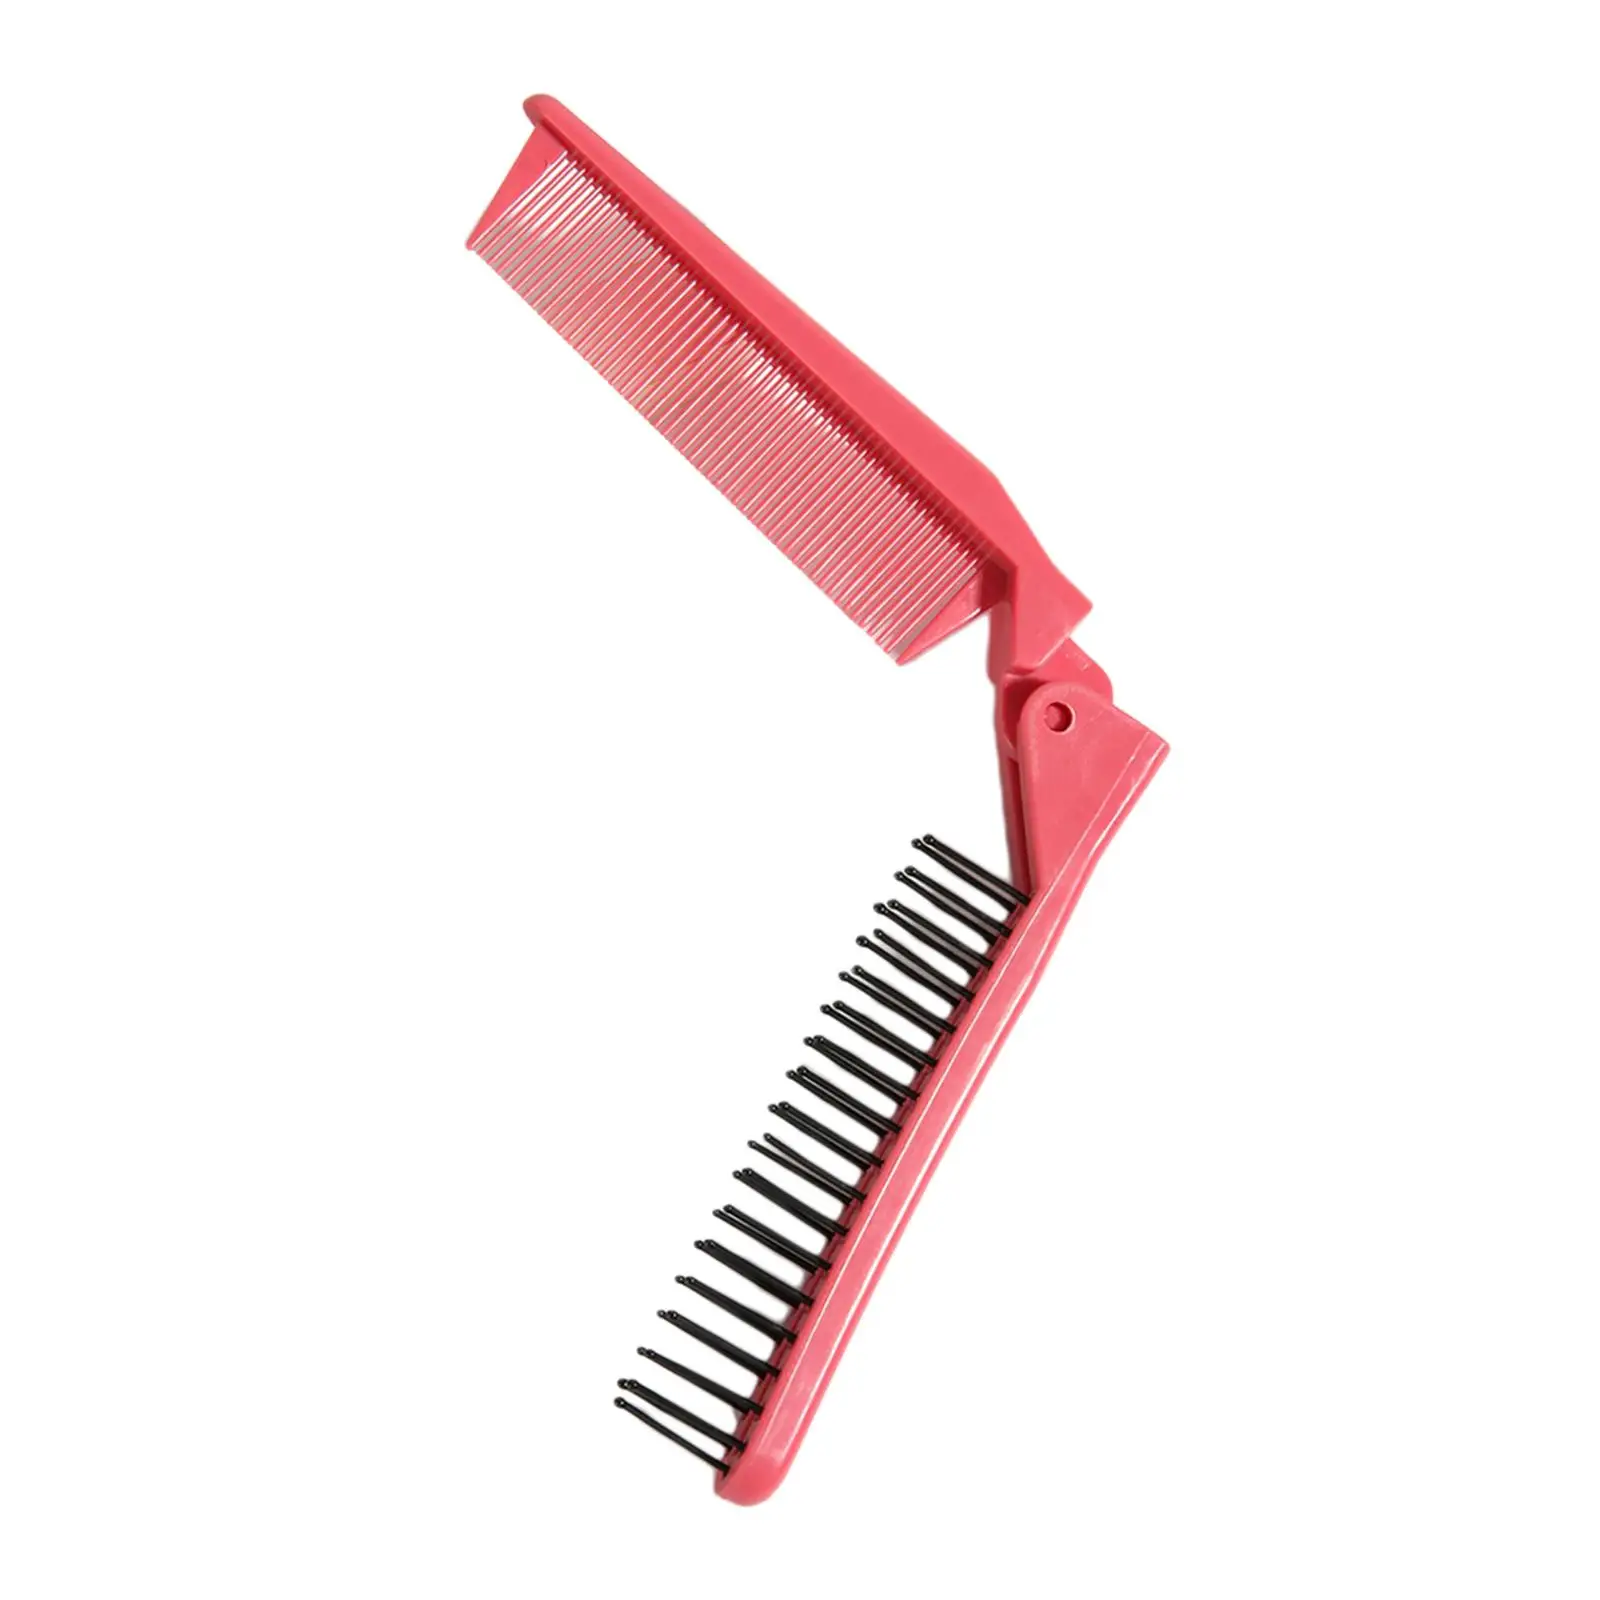 Foldable Hair Comb Hairdressing Styling Tool Portable Folding Comb Double Headed Hairbrush for Home Salon Men travel